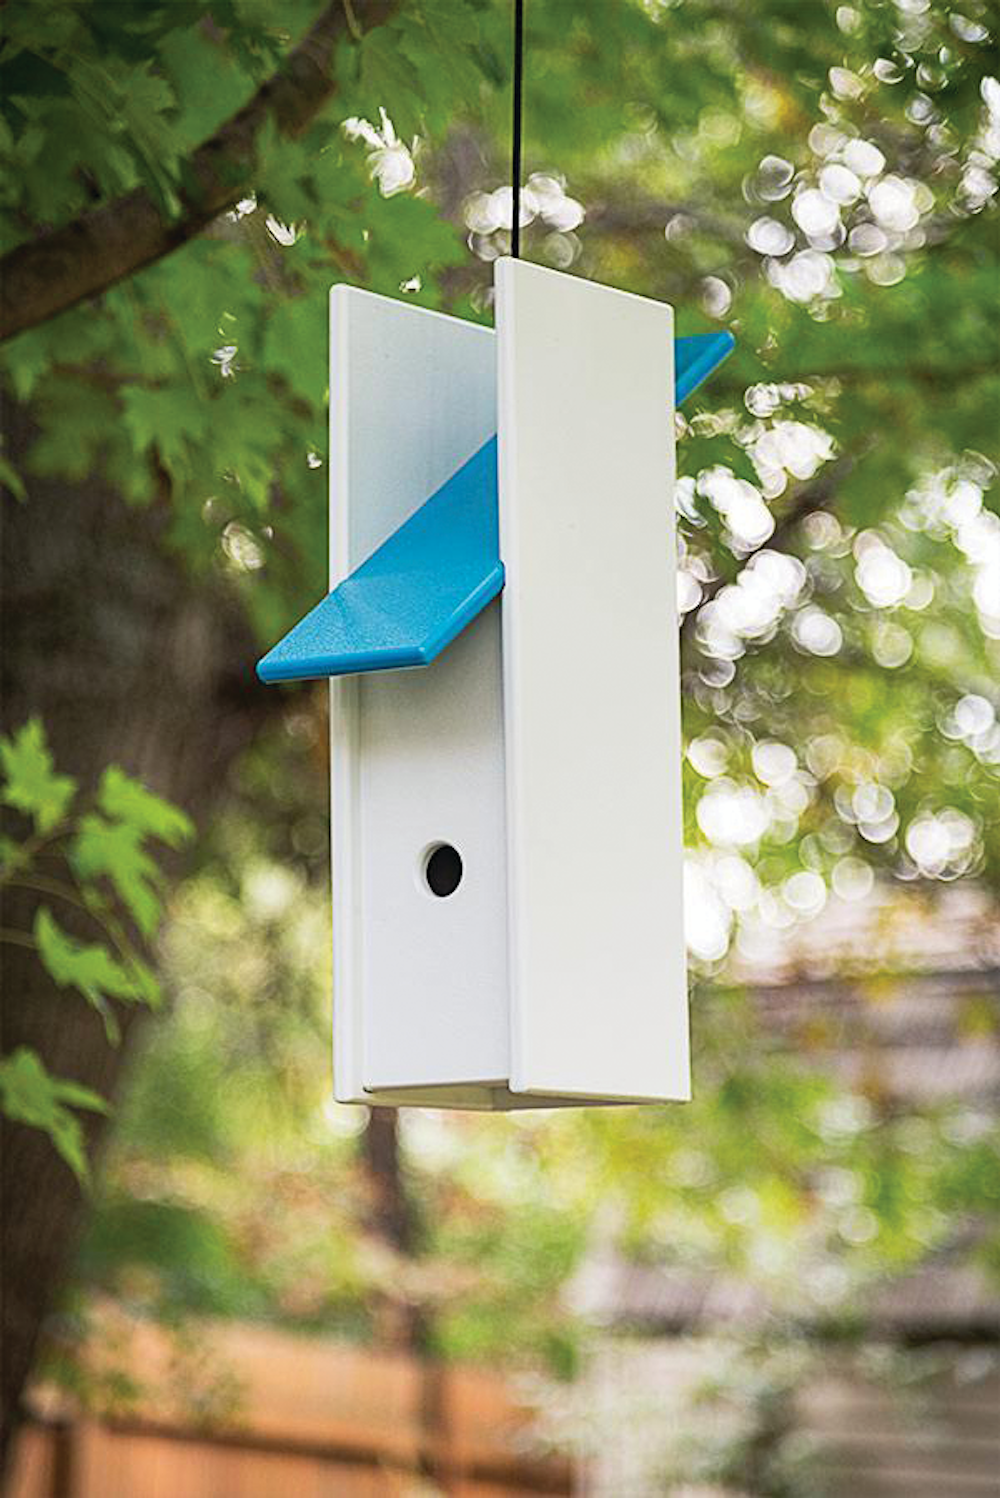 Loll Rapson Birdhouse in an outdoor setting